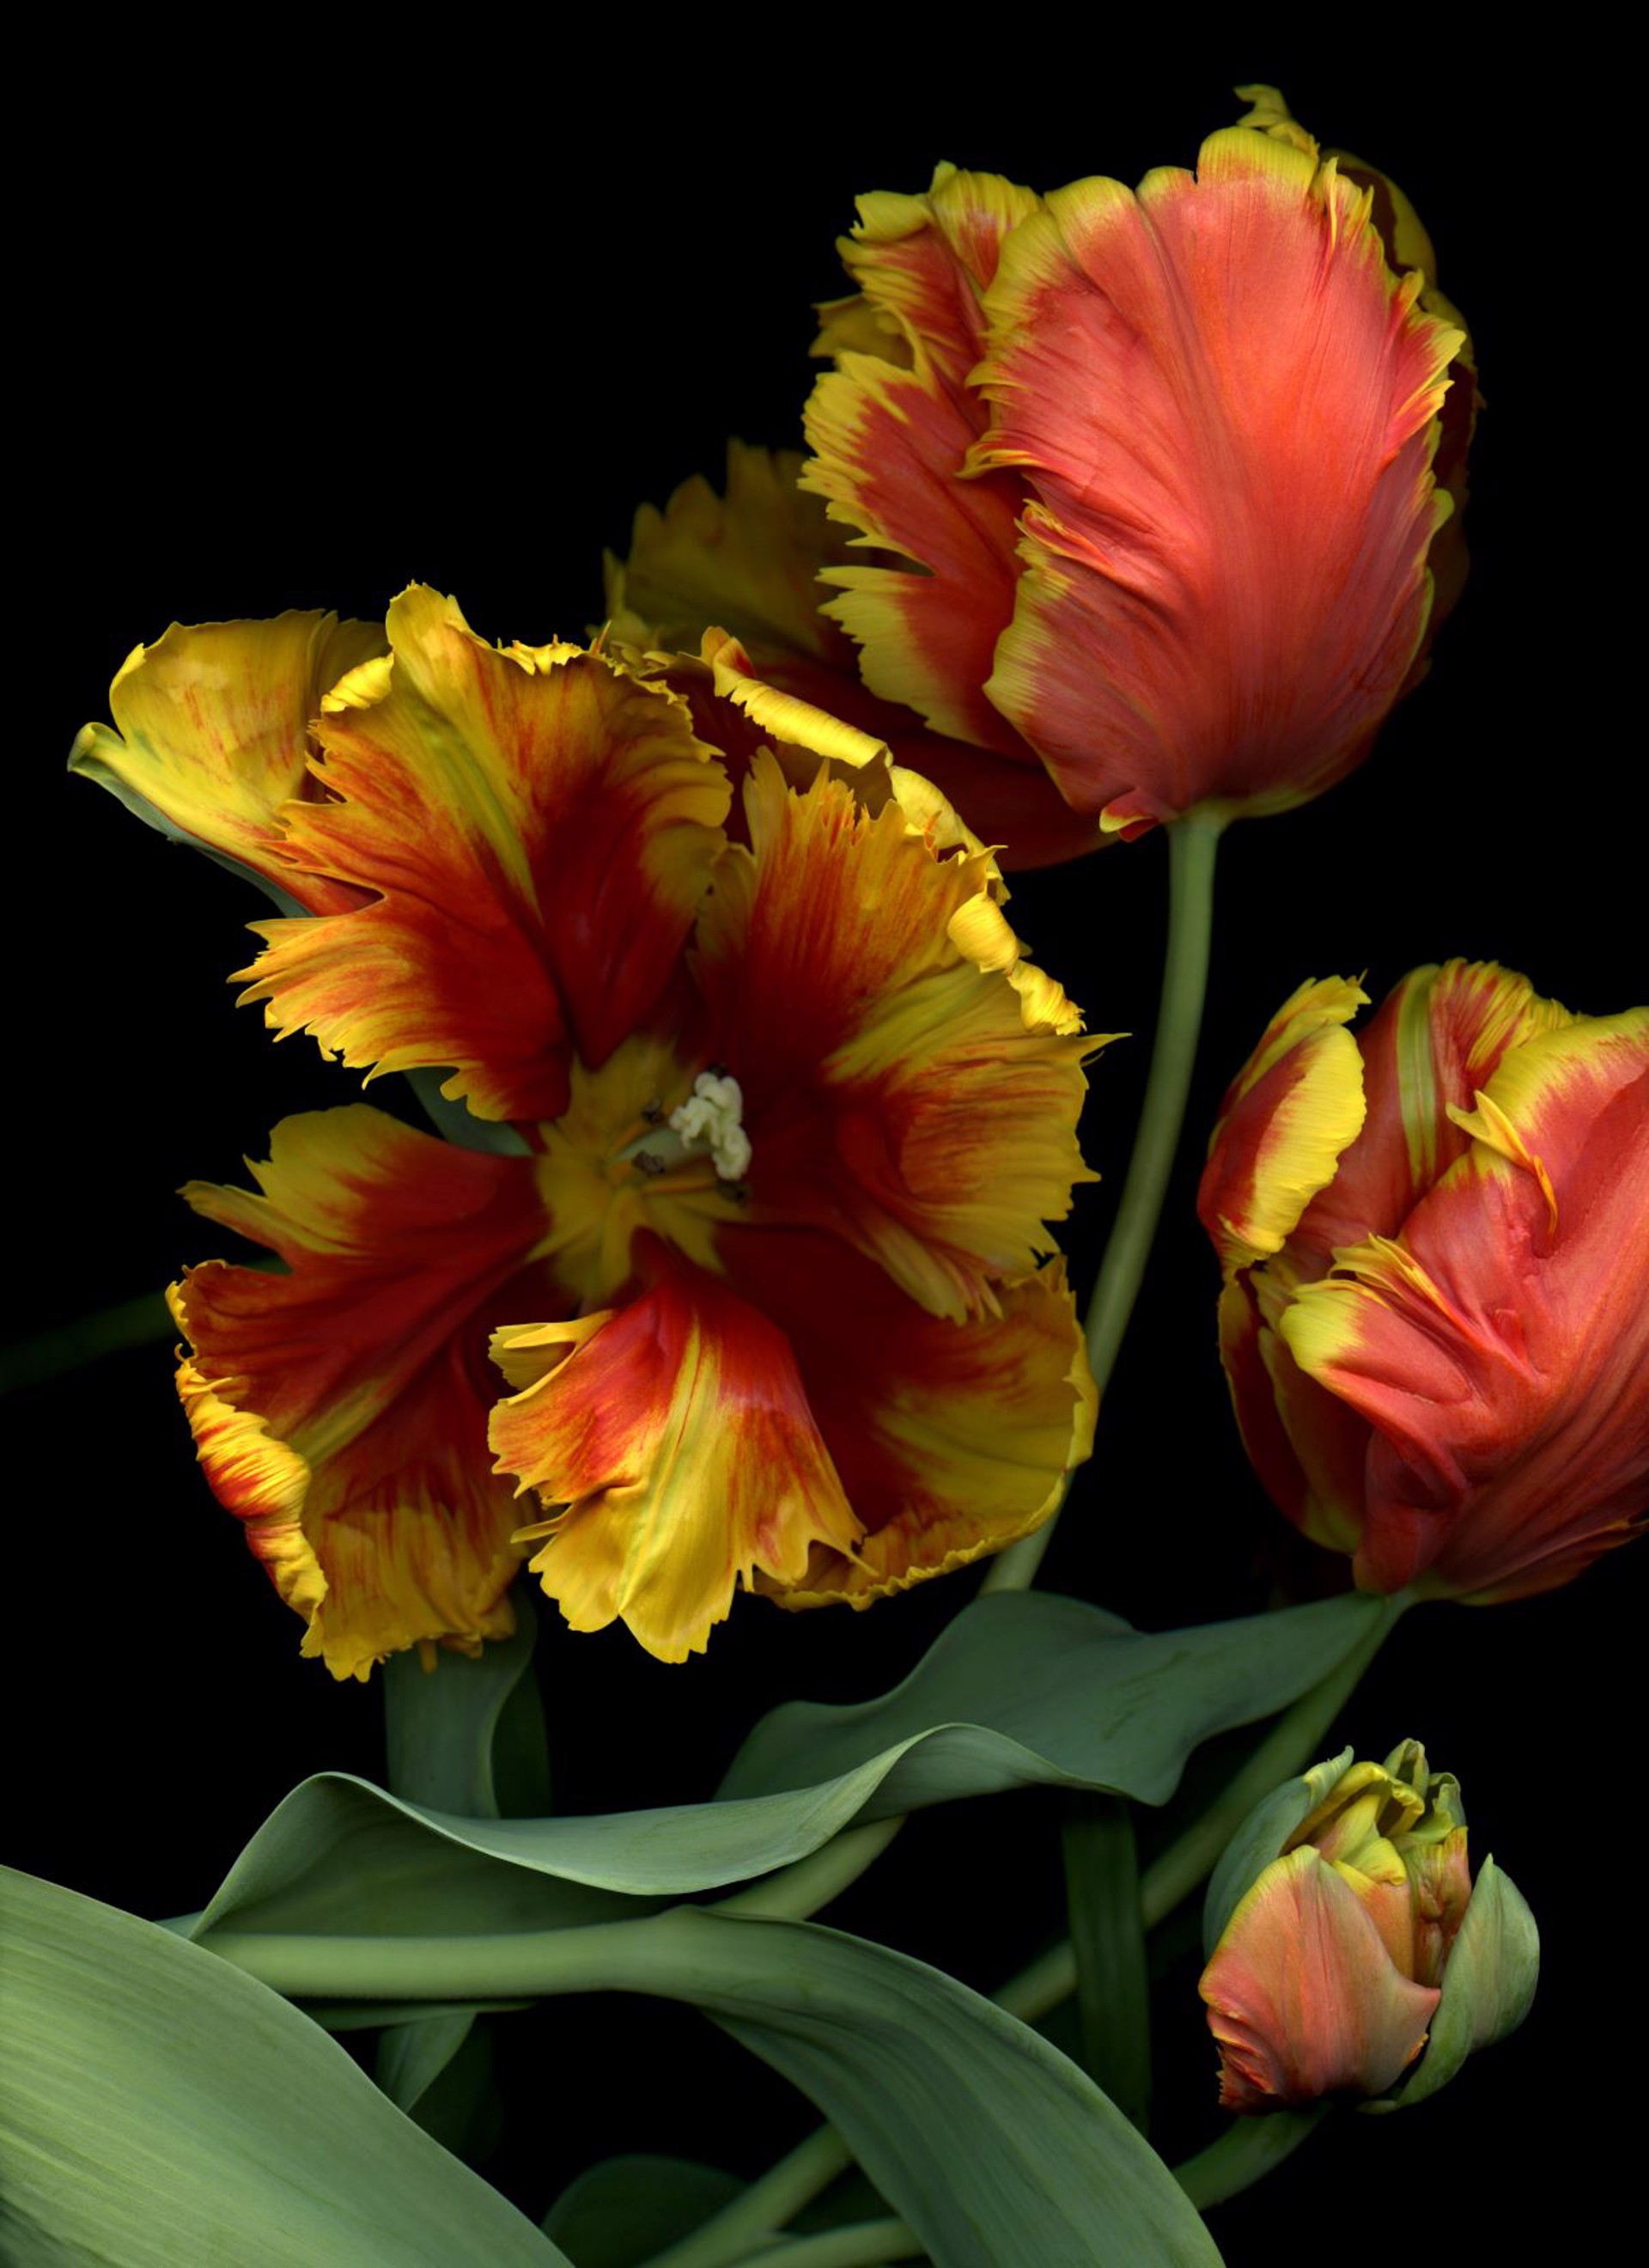 Tulips (Large format) by Laurie Tennent